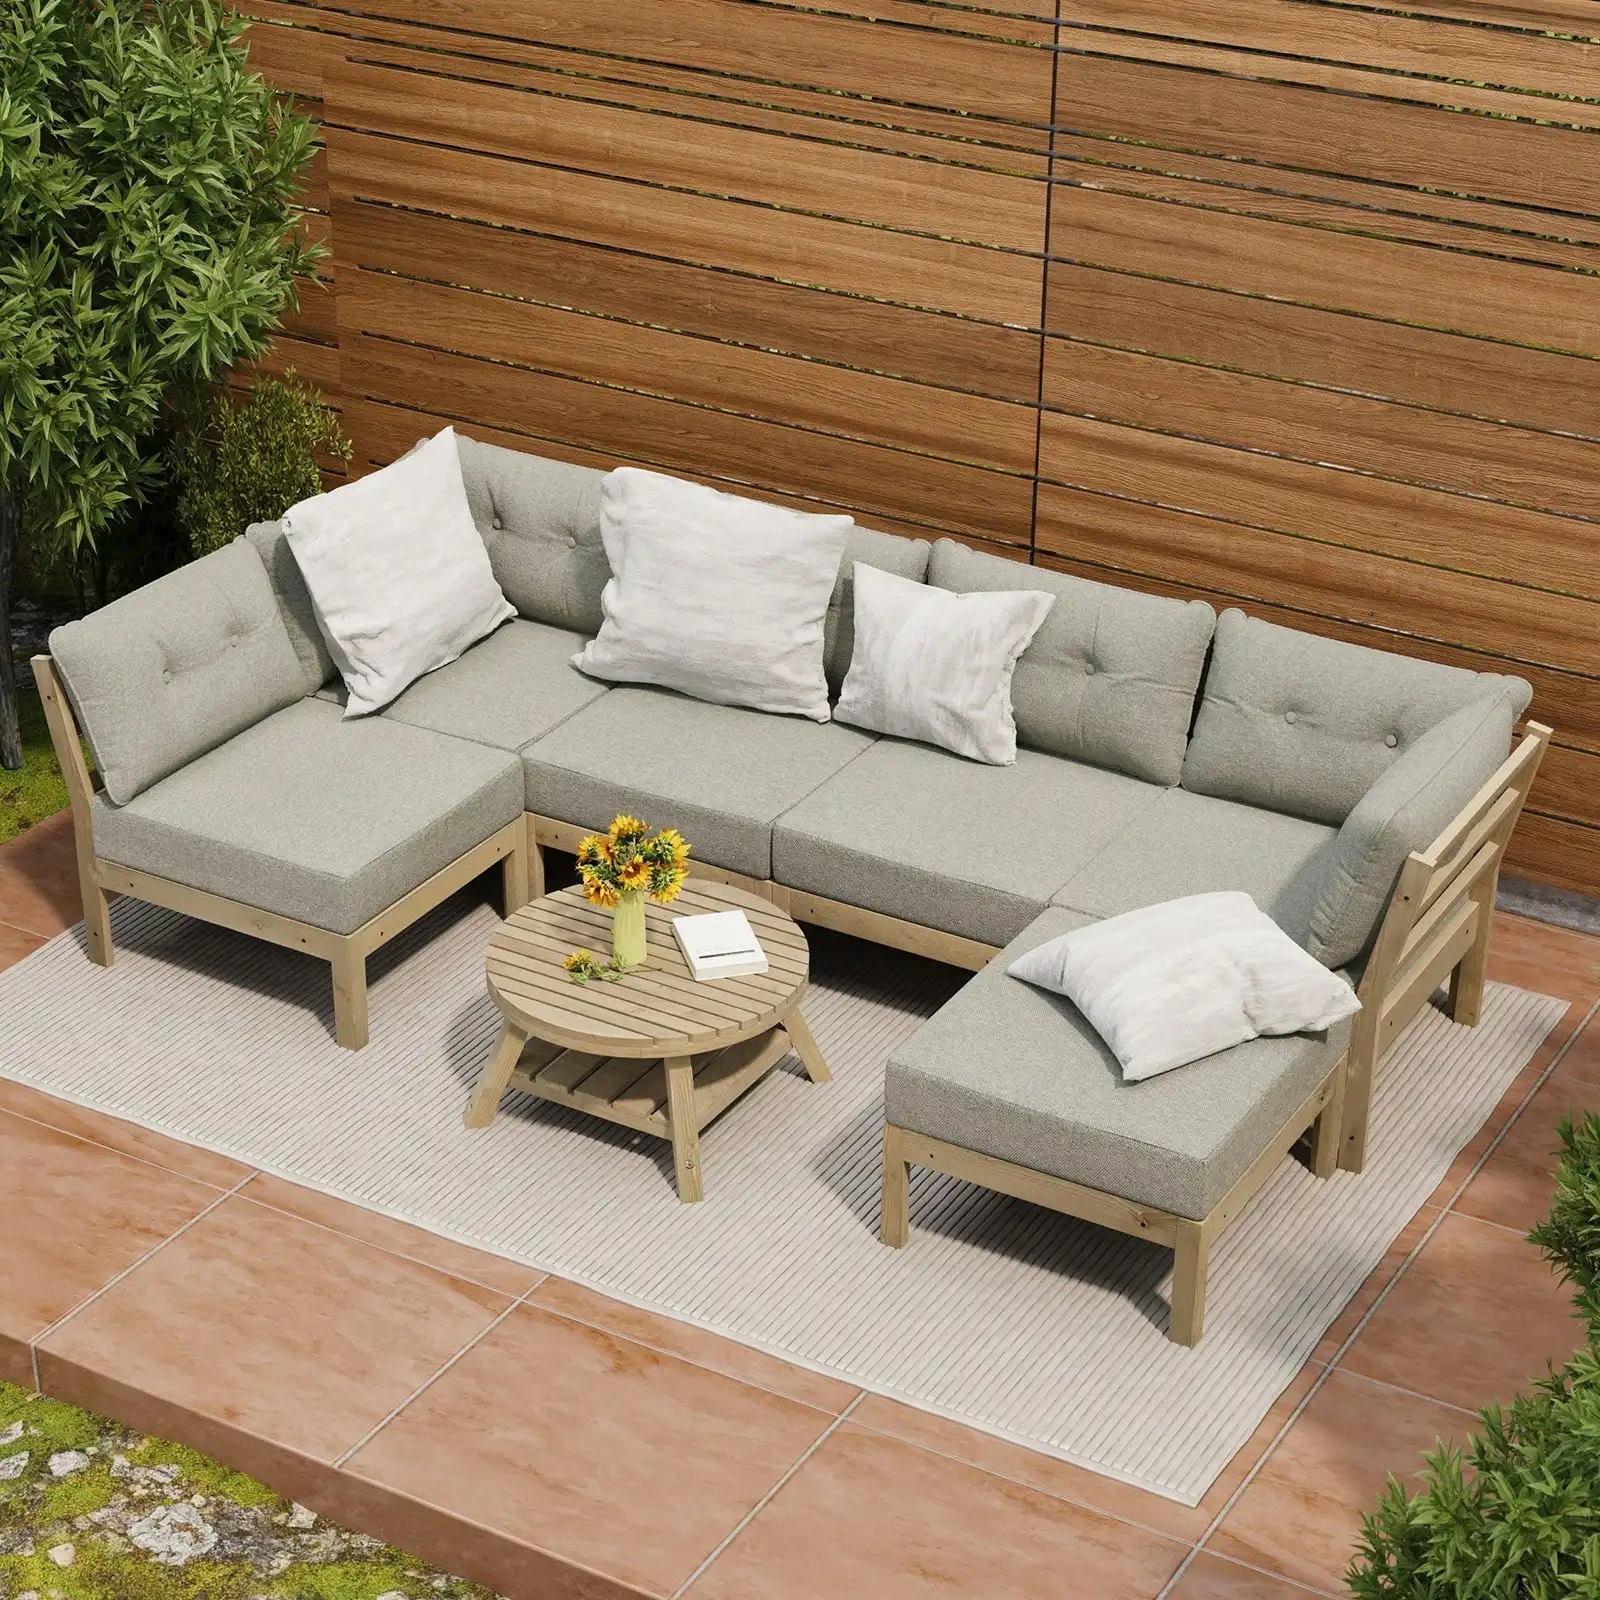 Livsip 7 Piece Outdoor Sofa Set 5-Seater Lounge Setting Garden Table Chairs